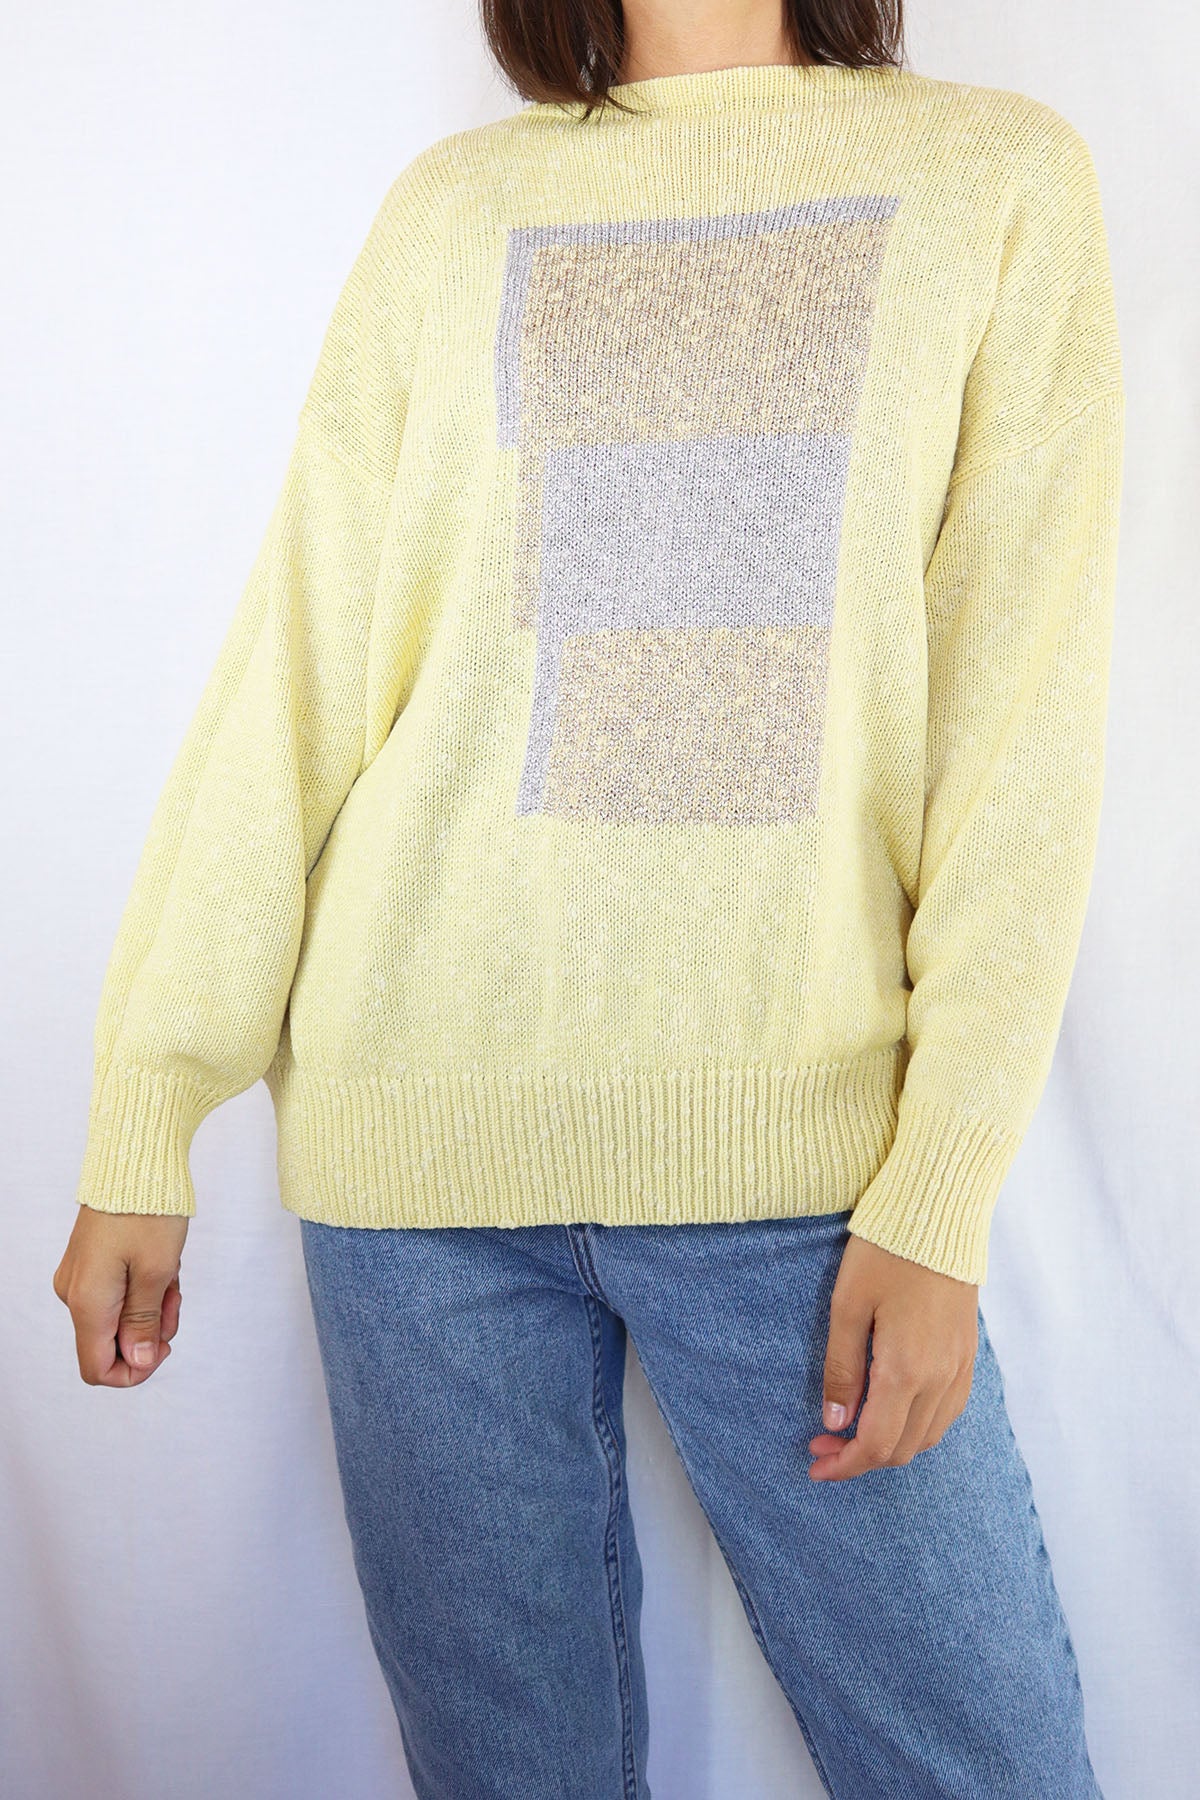 Pastell Yellow Glitter Vintage Pullover